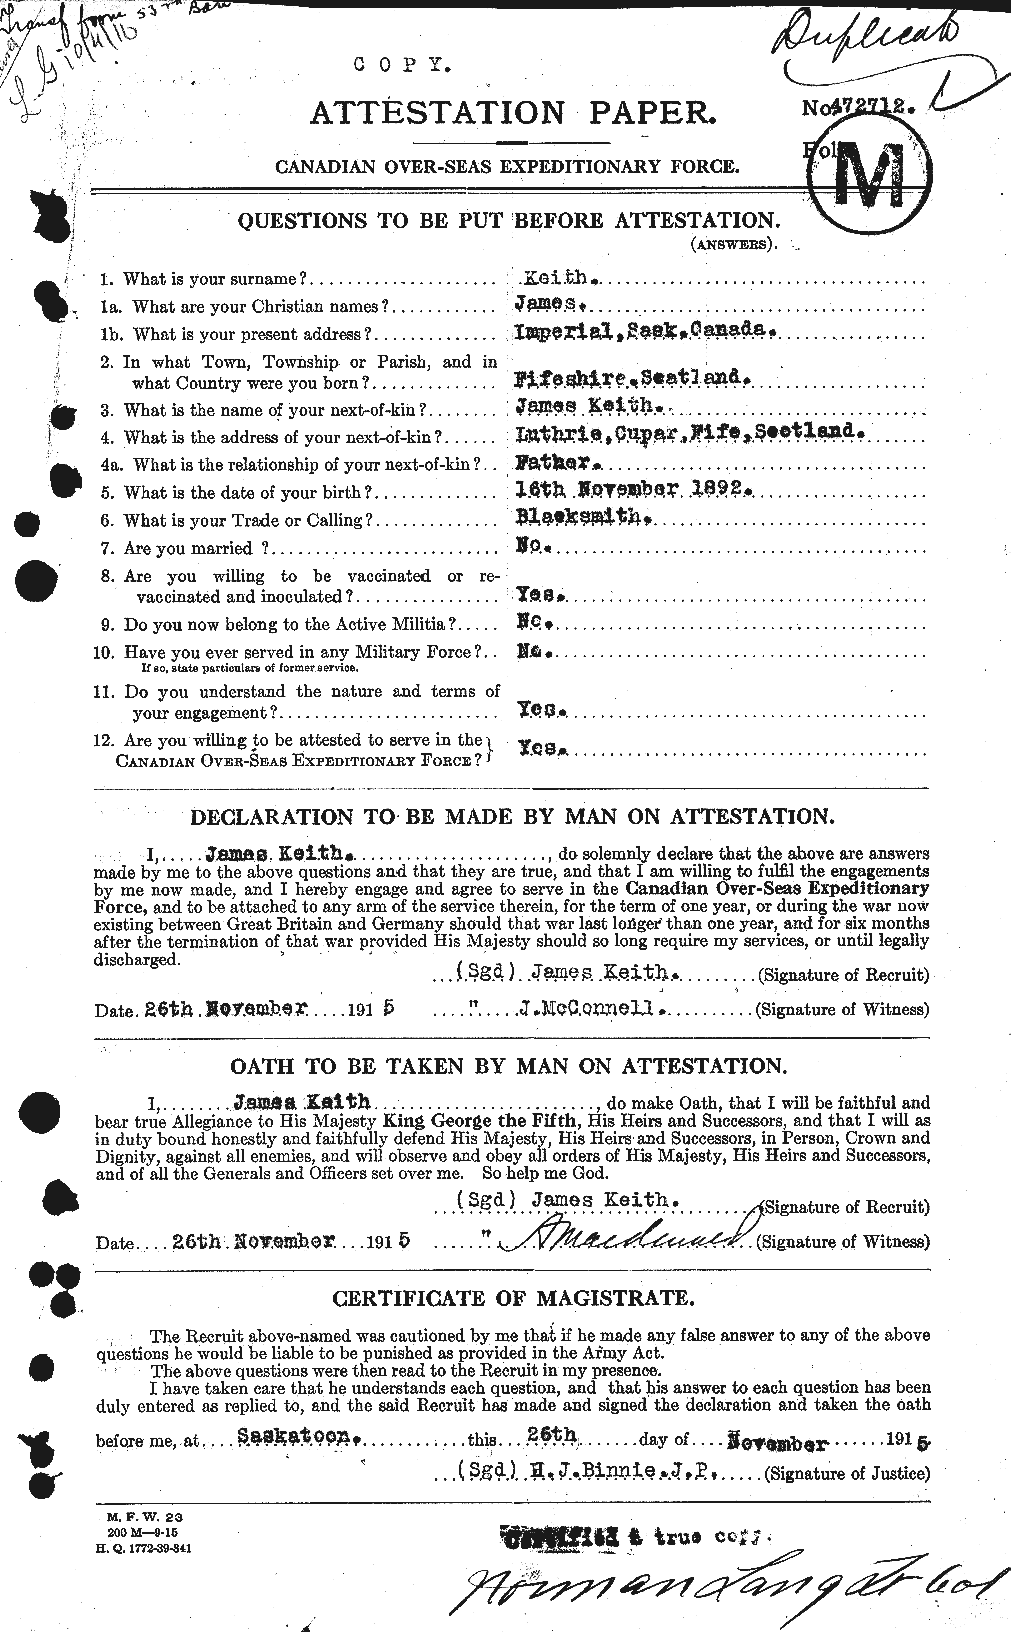 Personnel Records of the First World War - CEF 432455a